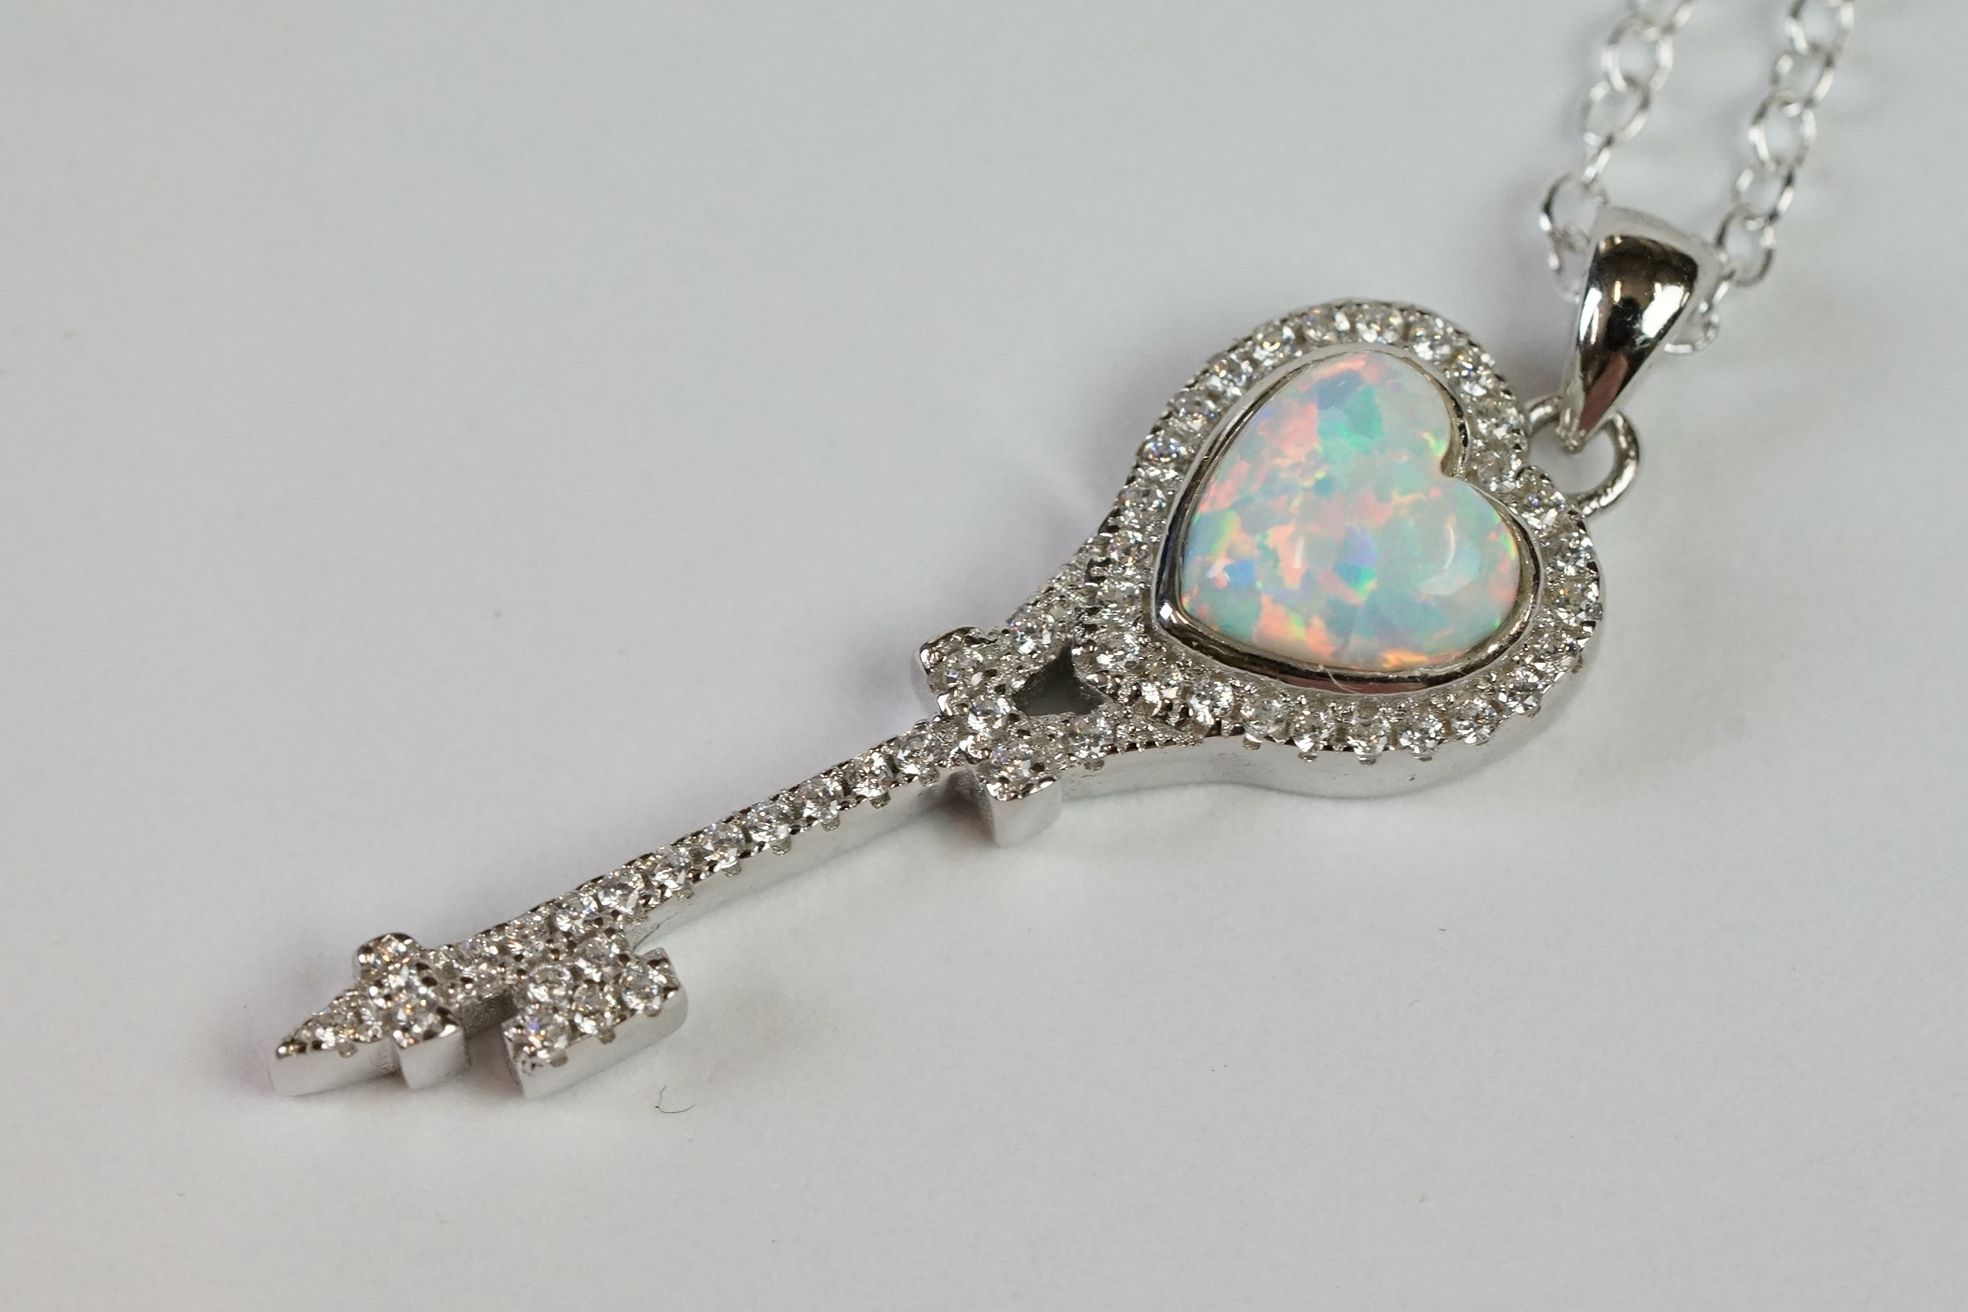 Silver CZ and Opal Key shaped Tiffany style Pendant Necklace - Image 3 of 7